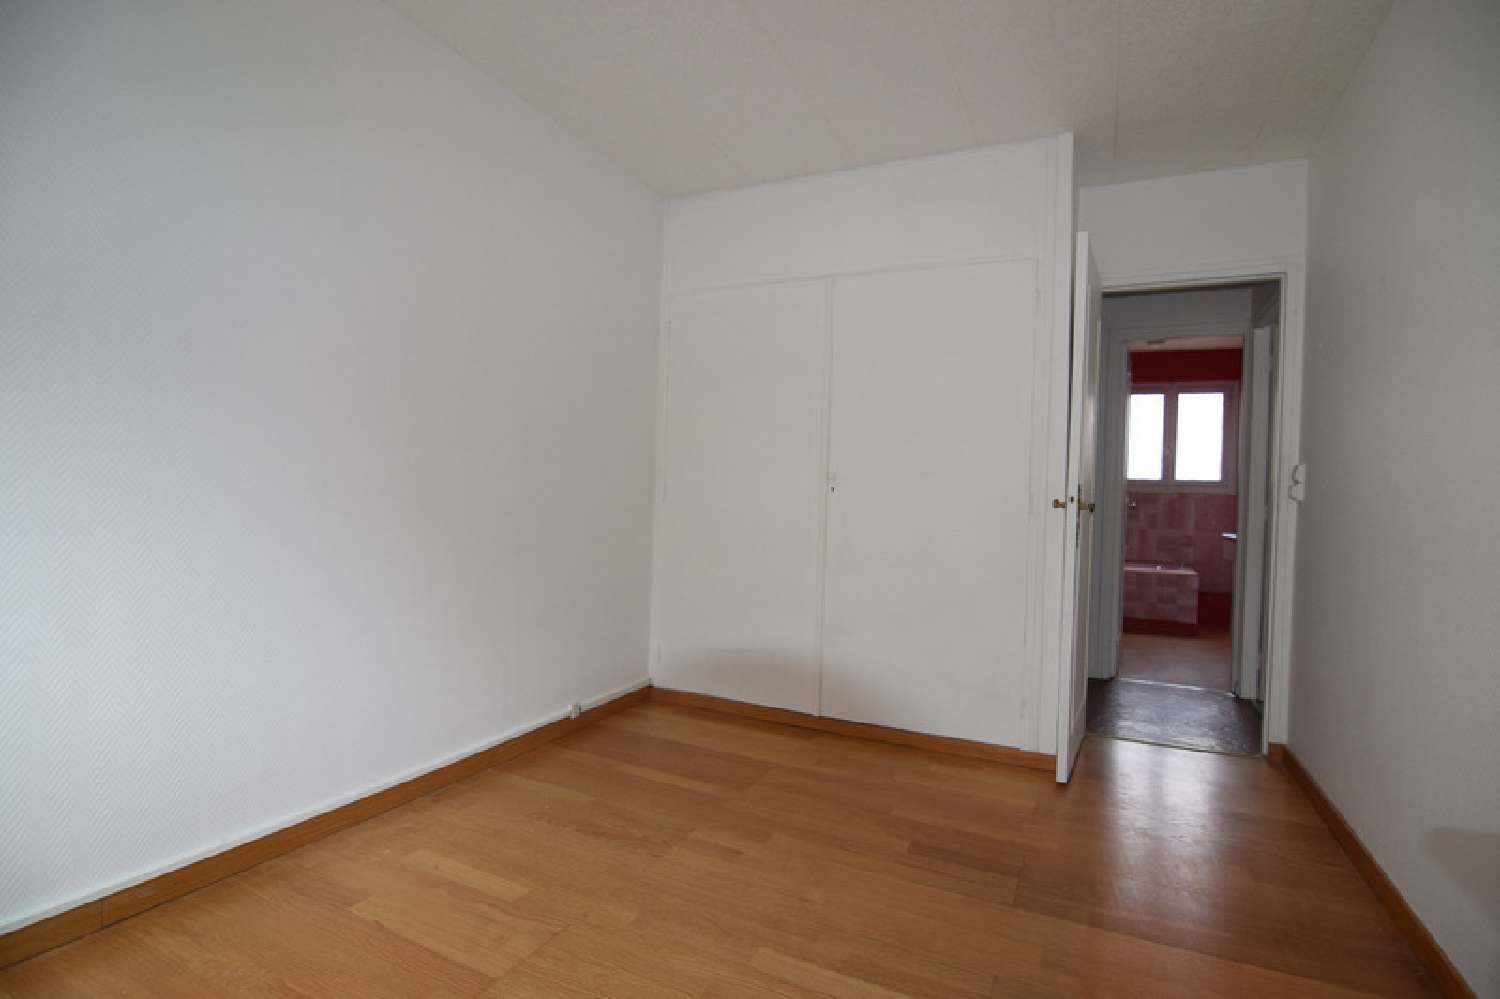  à vendre appartement Fâches-Thumesnil Nord 4